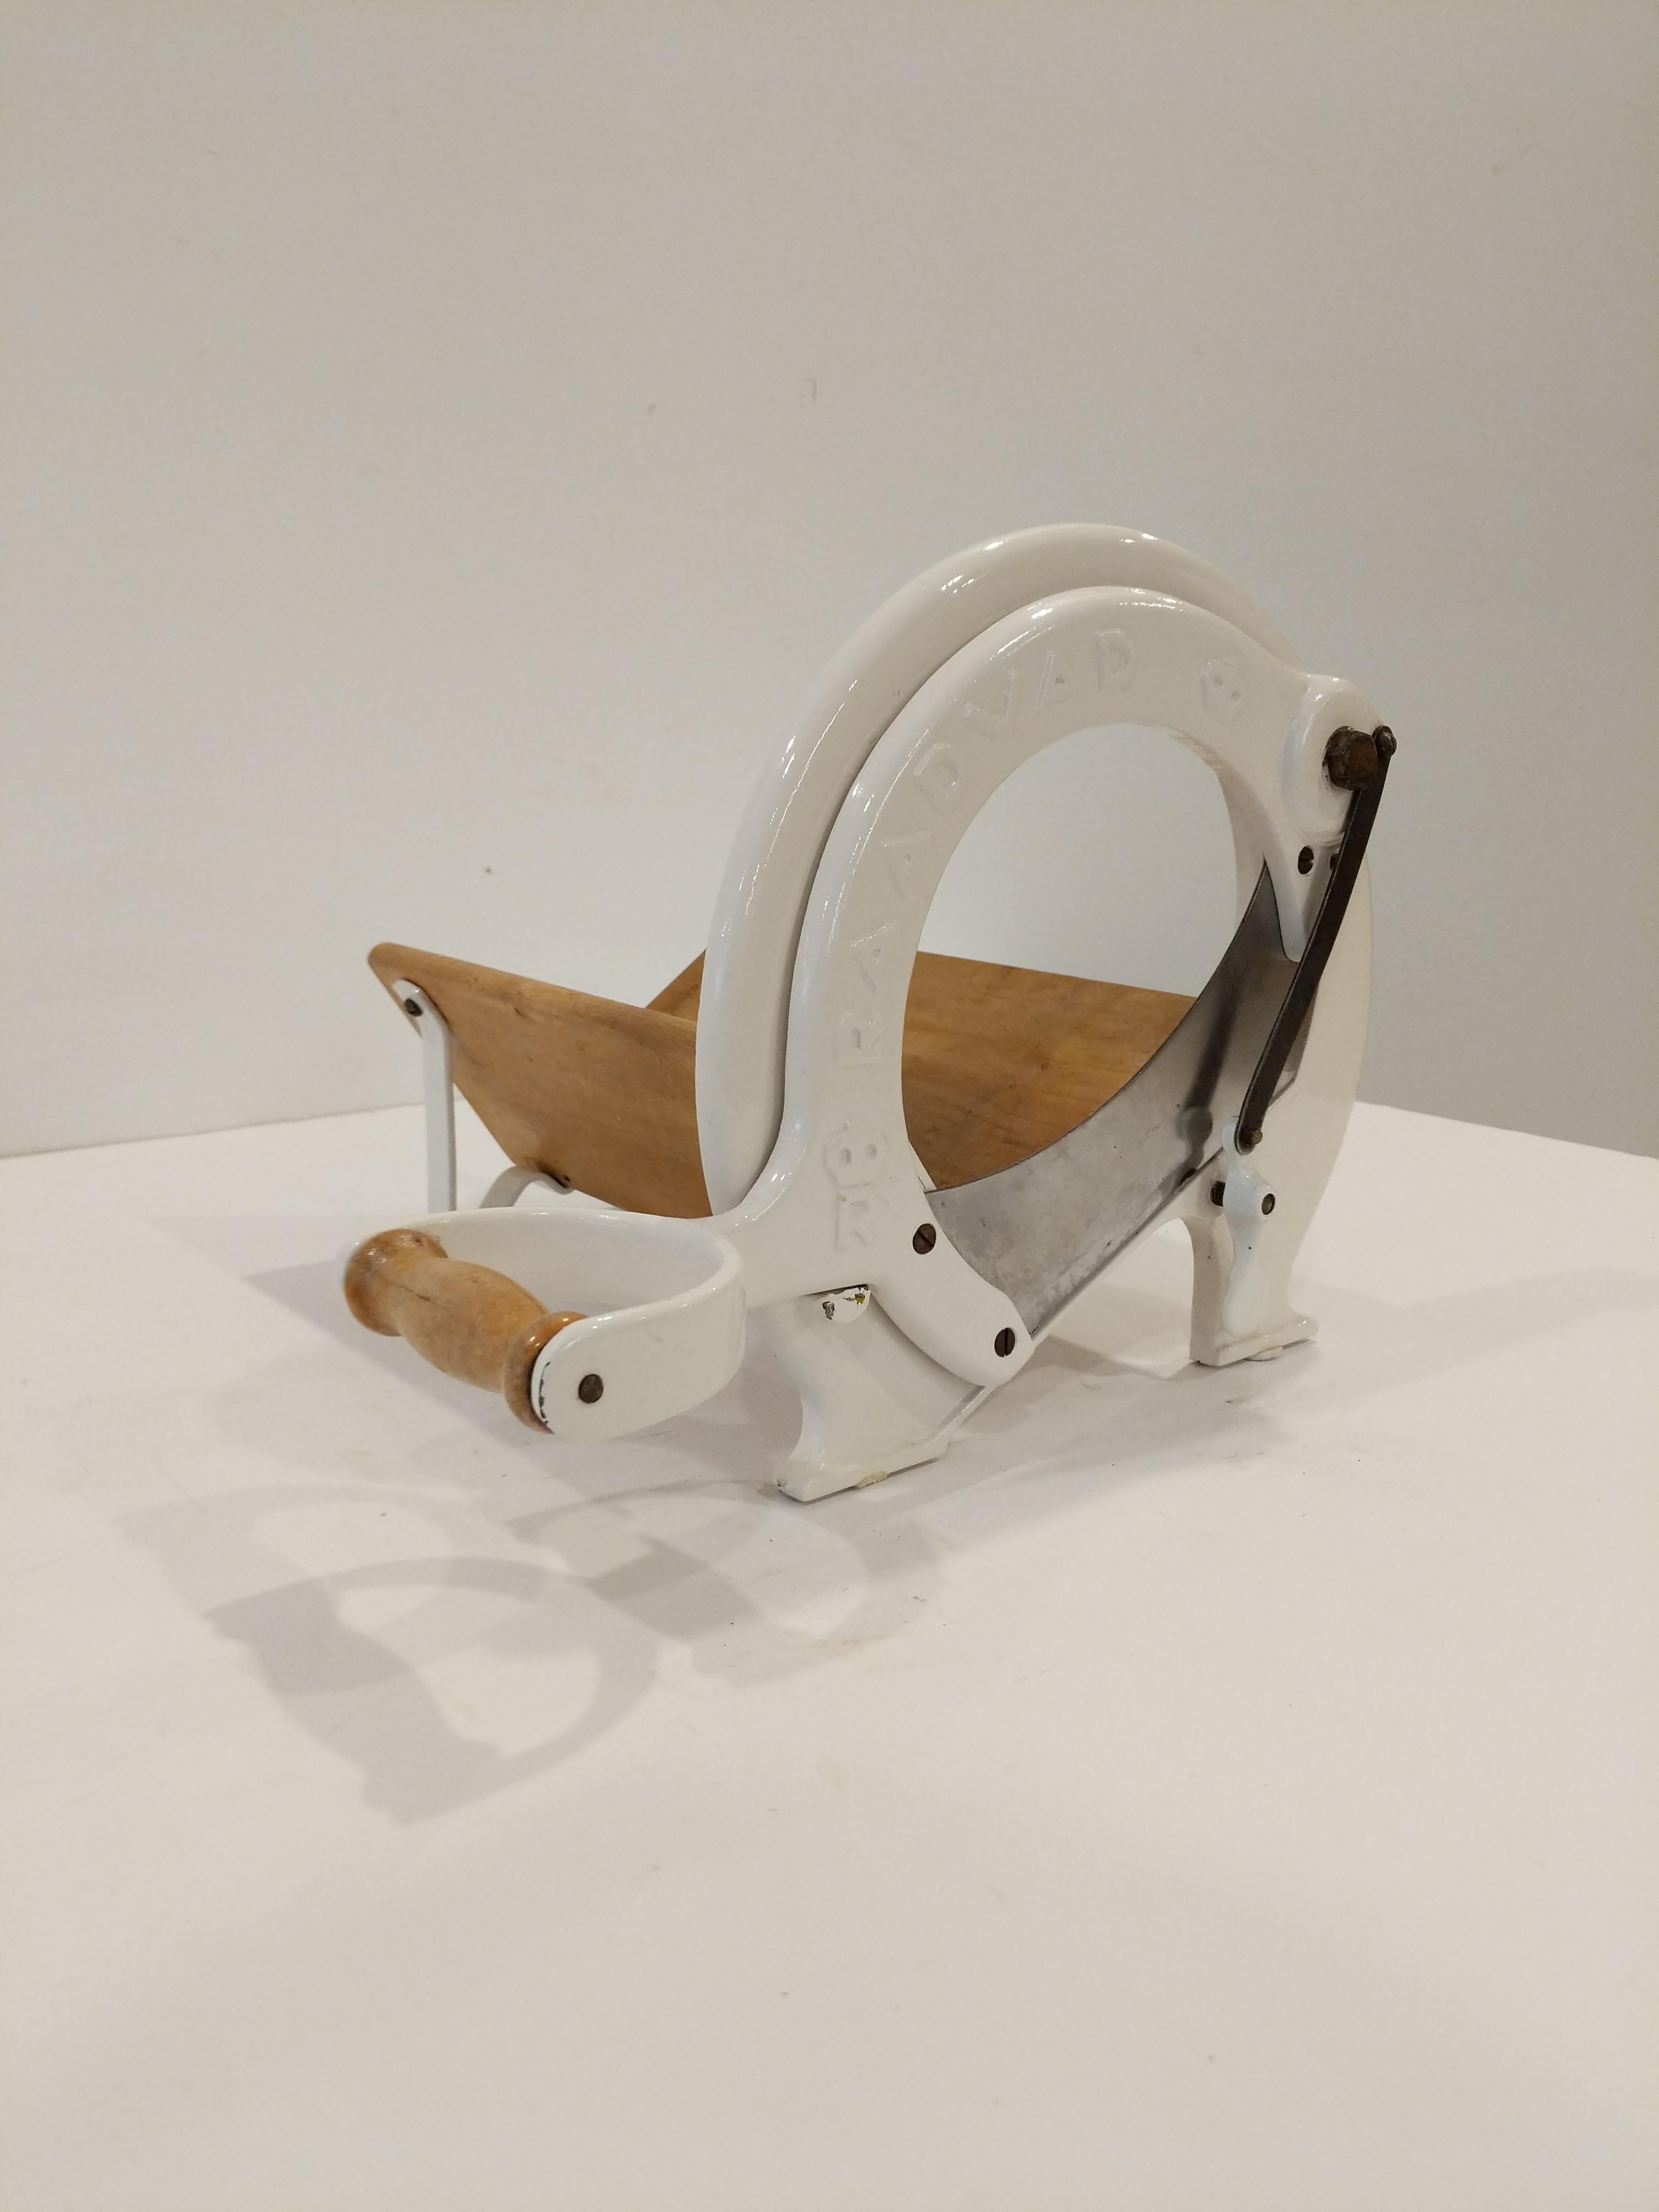 Authentic vintage Danish bread slicer / guillotine in white with longer bread holder.

Model 293 by Raadvad.

This slicer is in good condition overall and expectedly shows its age a bit.

Dimensions:
13.5” Long including handle
9.5” Tall
12.5”